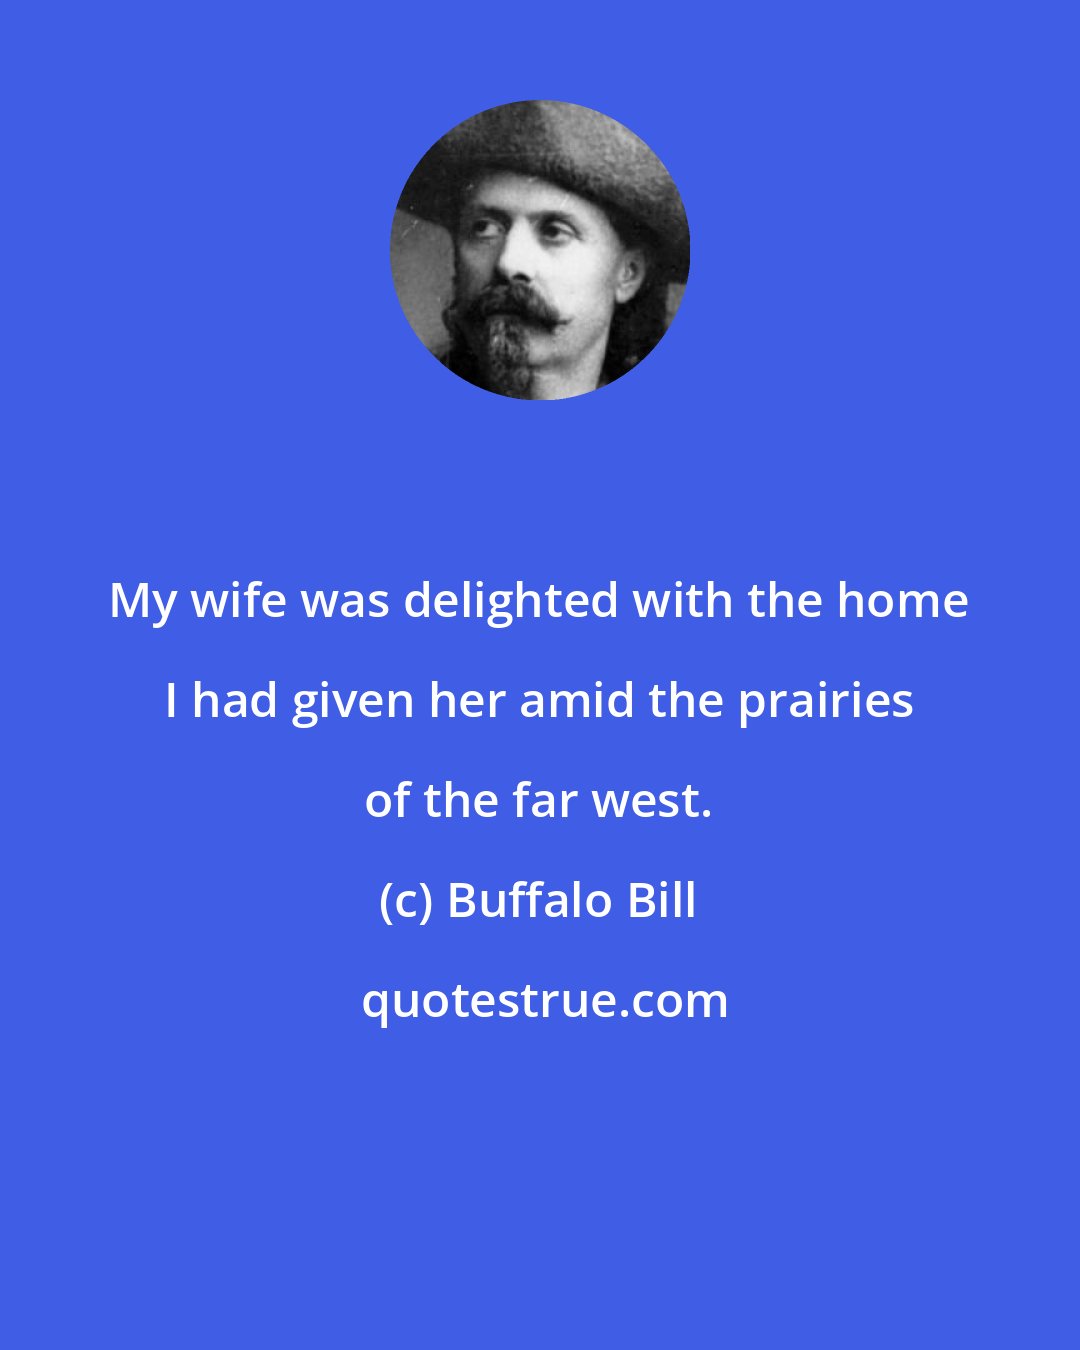 Buffalo Bill: My wife was delighted with the home I had given her amid the prairies of the far west.